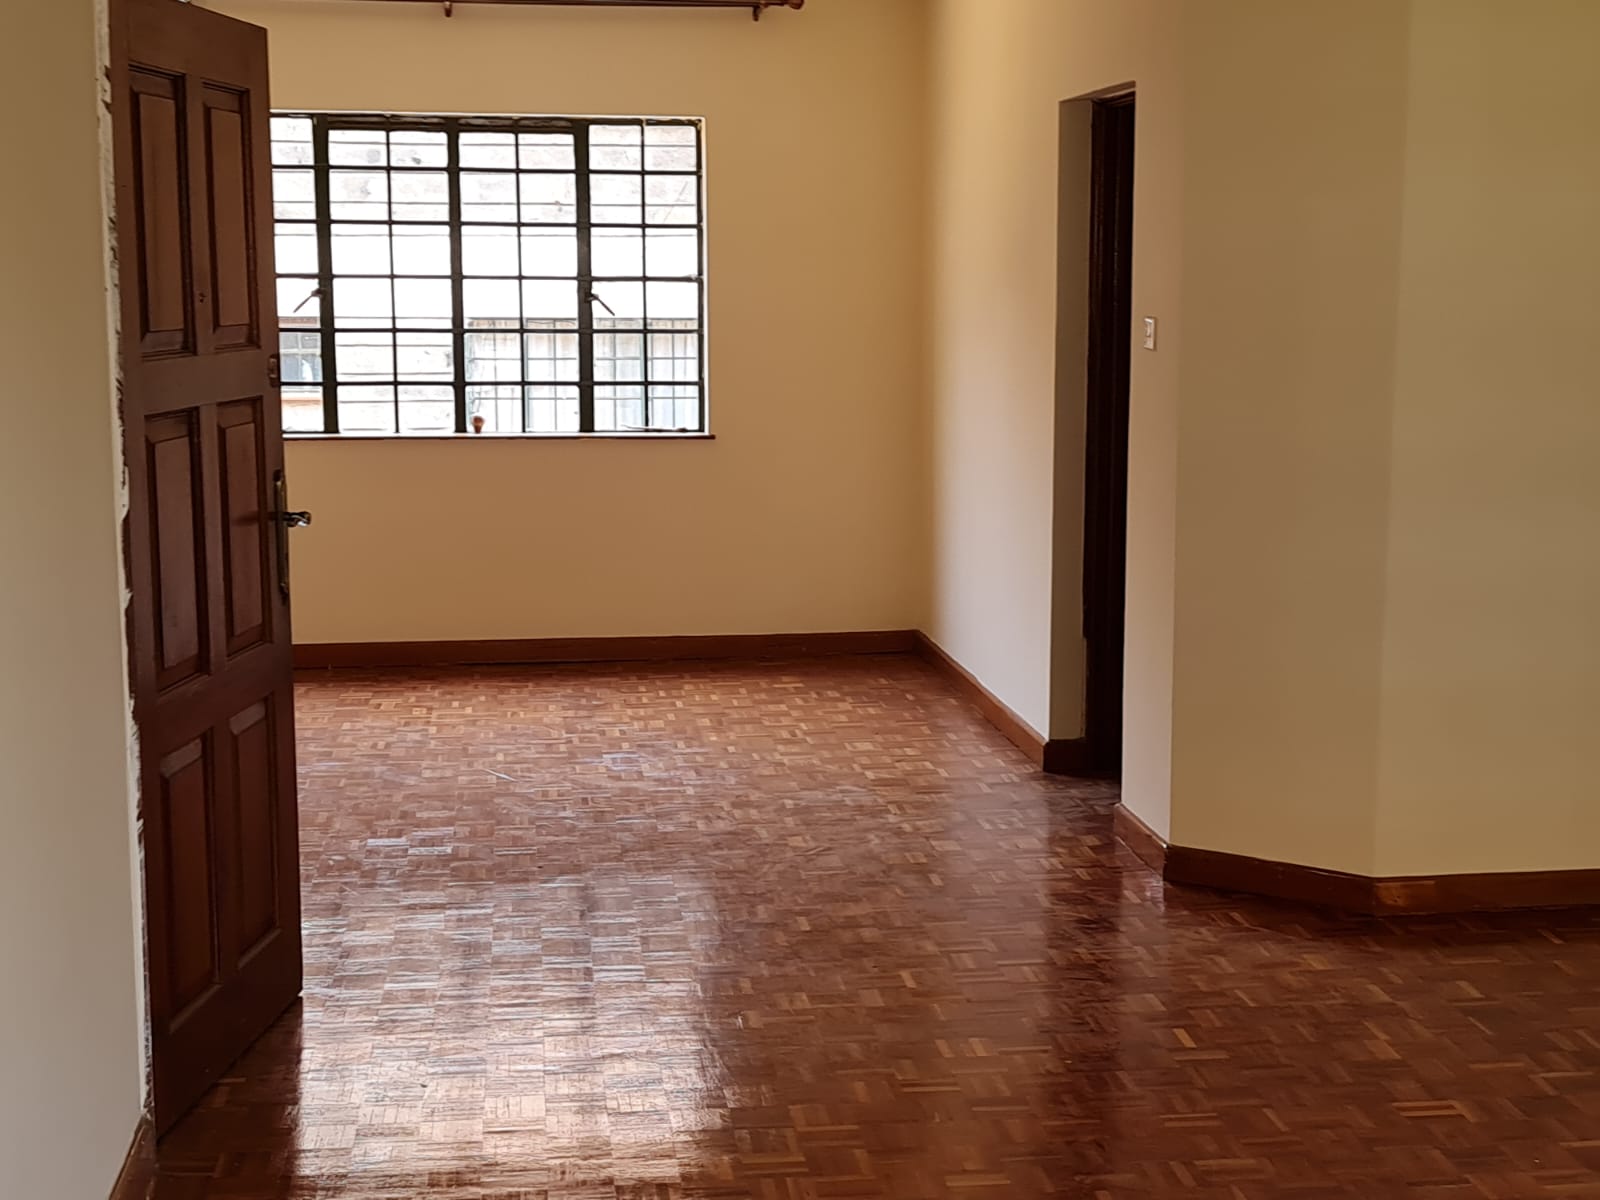 Newly Renovated Spacious 4 Bedroom Apartment for Rent at Ksh95k in Westlands, Raphta Road (26)